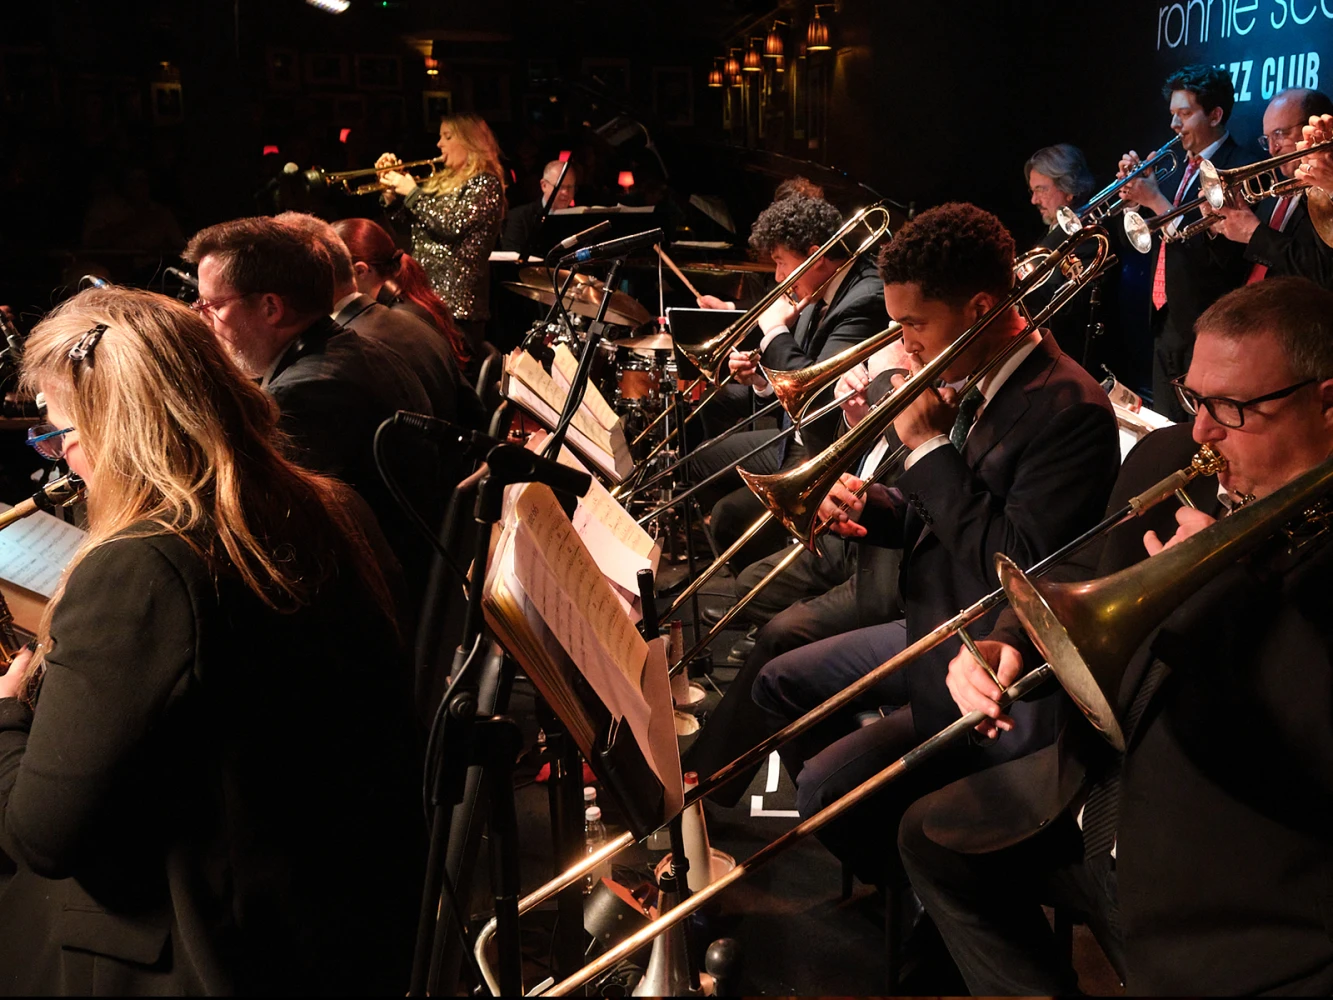 BATTERSEA PARK IN CONCERT: Ronnie Scott’s Jazz Orchestra & Special Guests : What to expect - 3